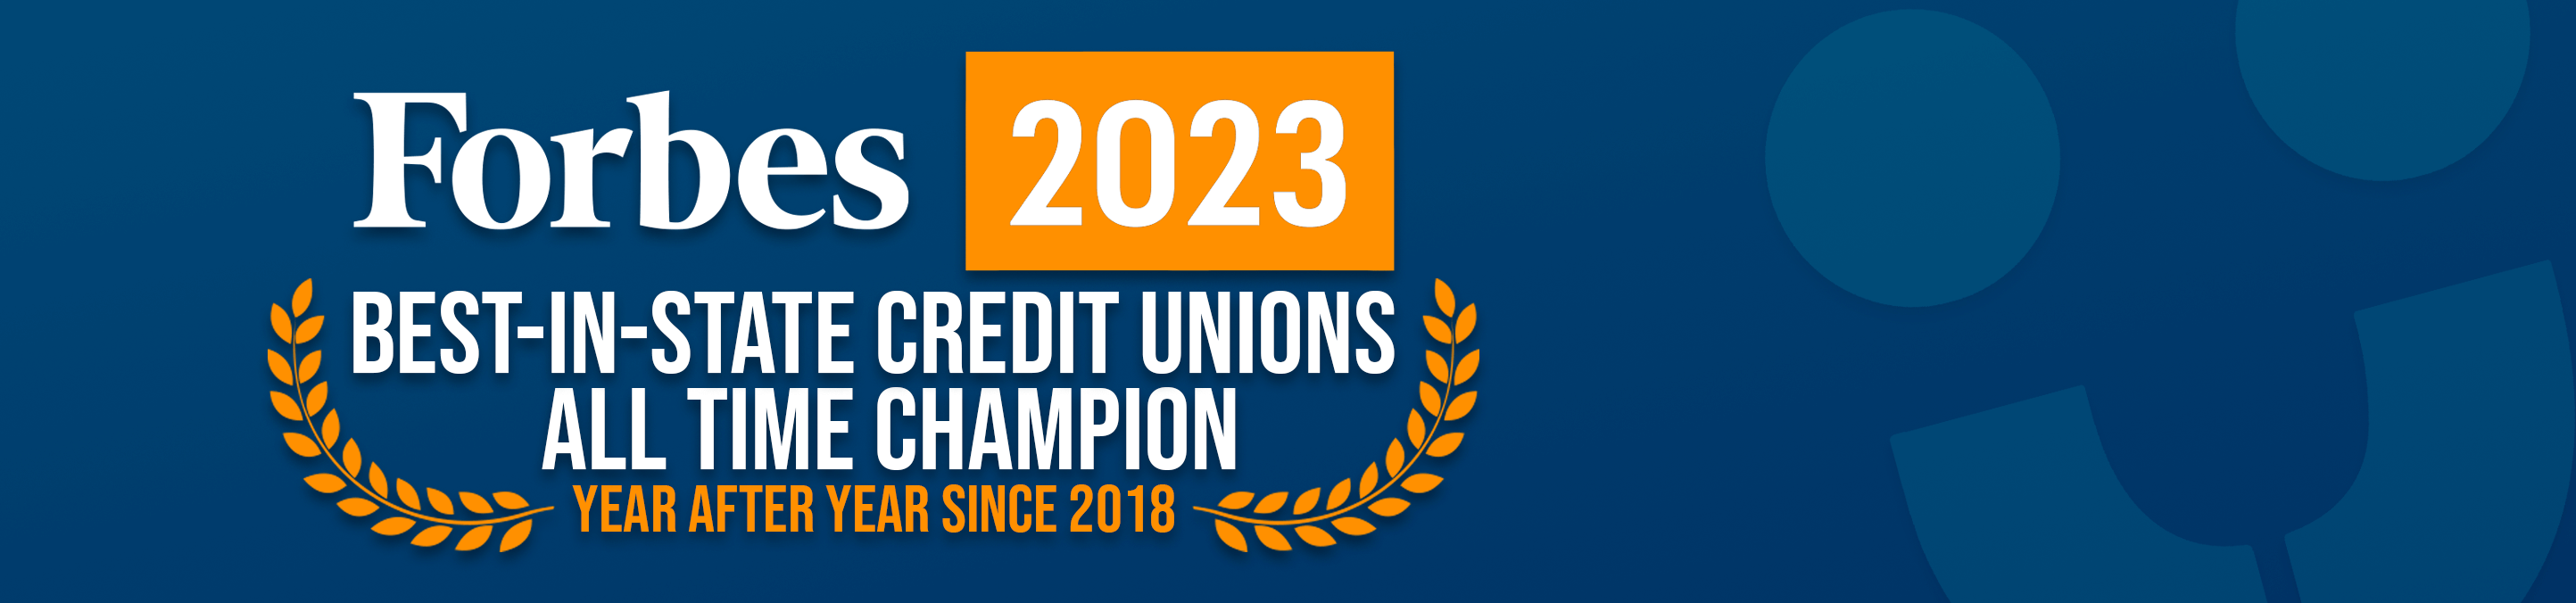 Forbes 2023 Best-In-State Credit Unions All Time Champion Year After Year Since 2018